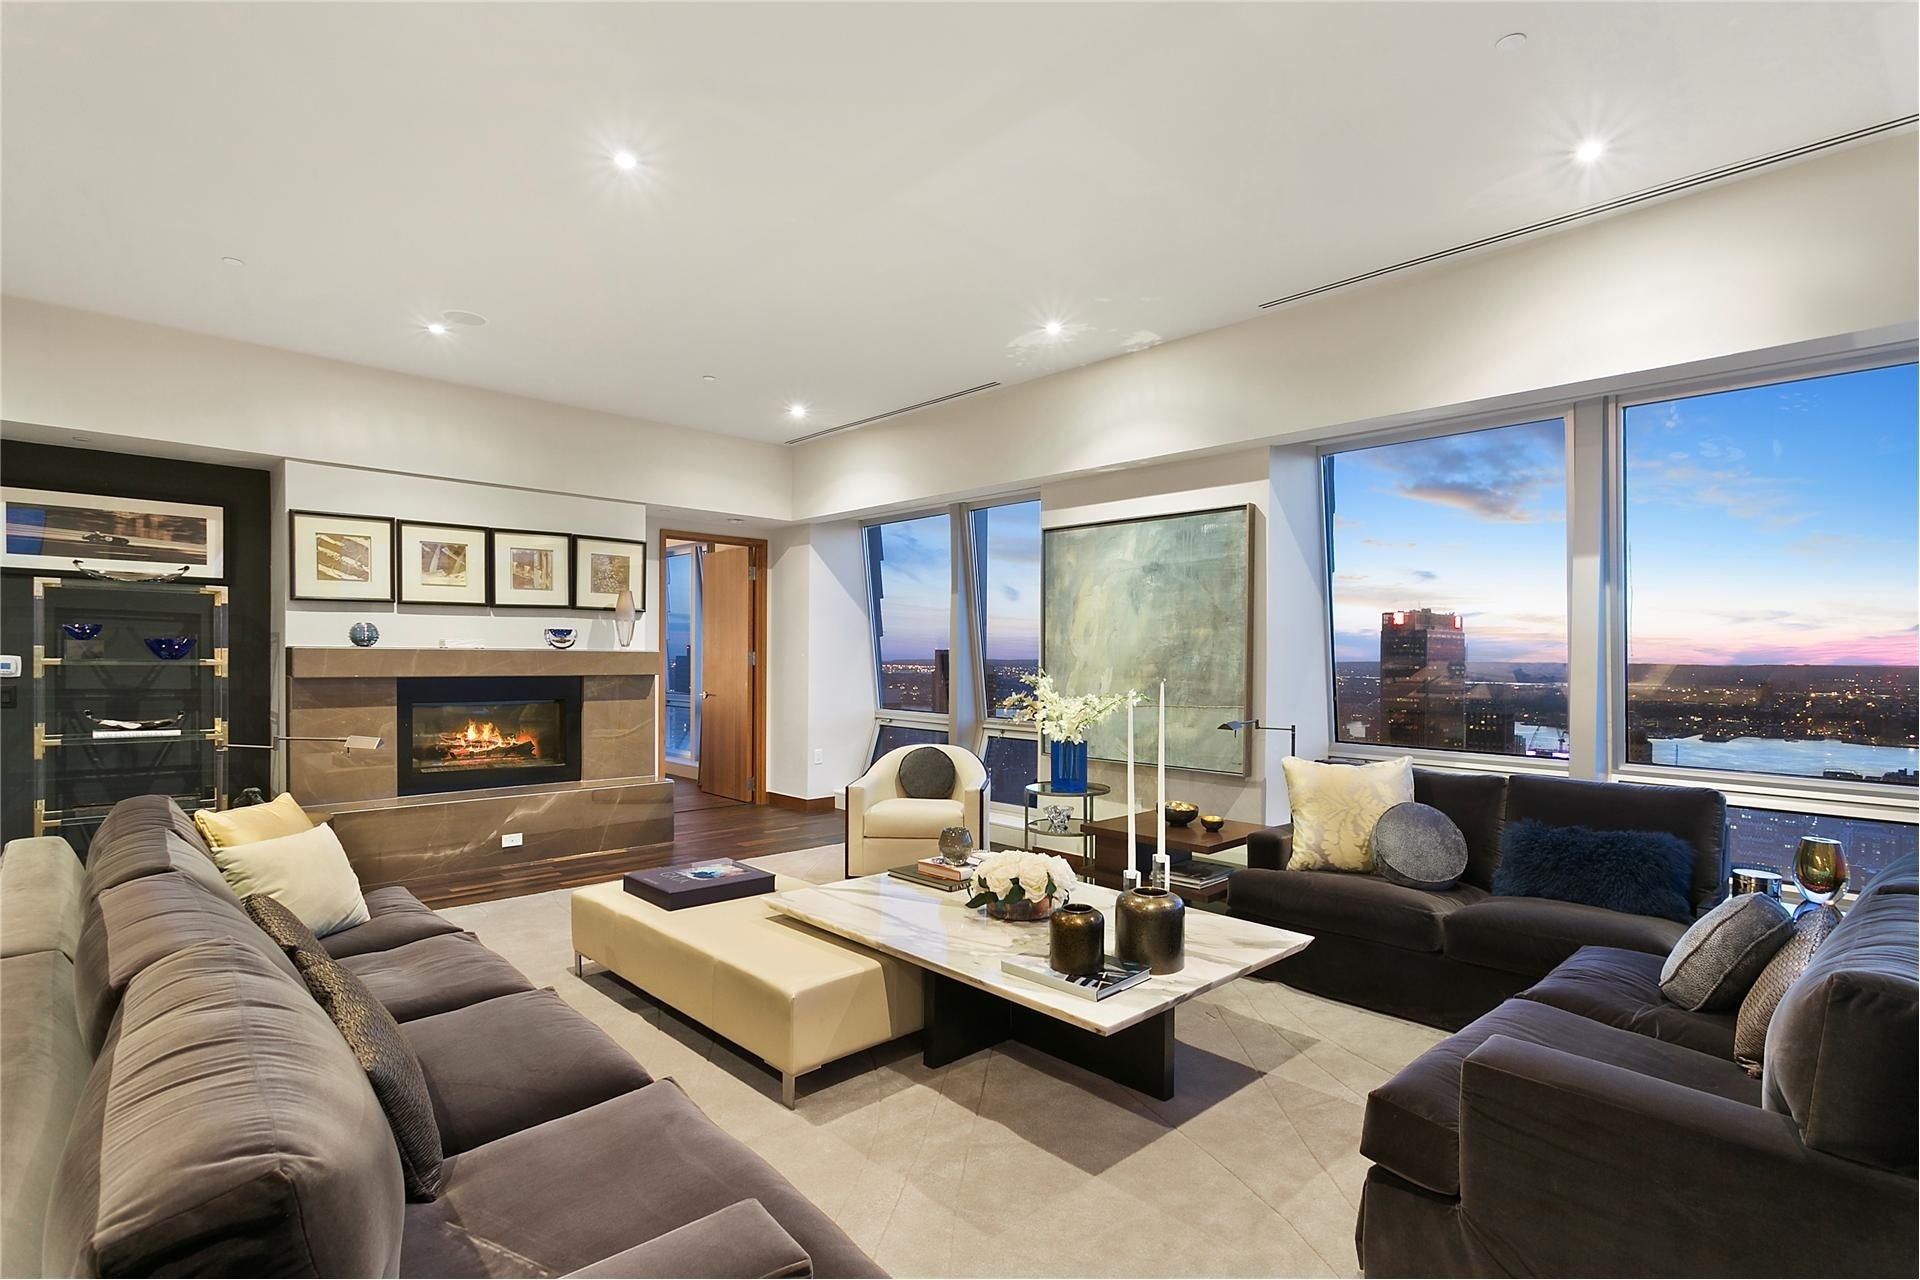 Condominium at 400 Fifth Avenue, PH1N Midtown South Central, New York